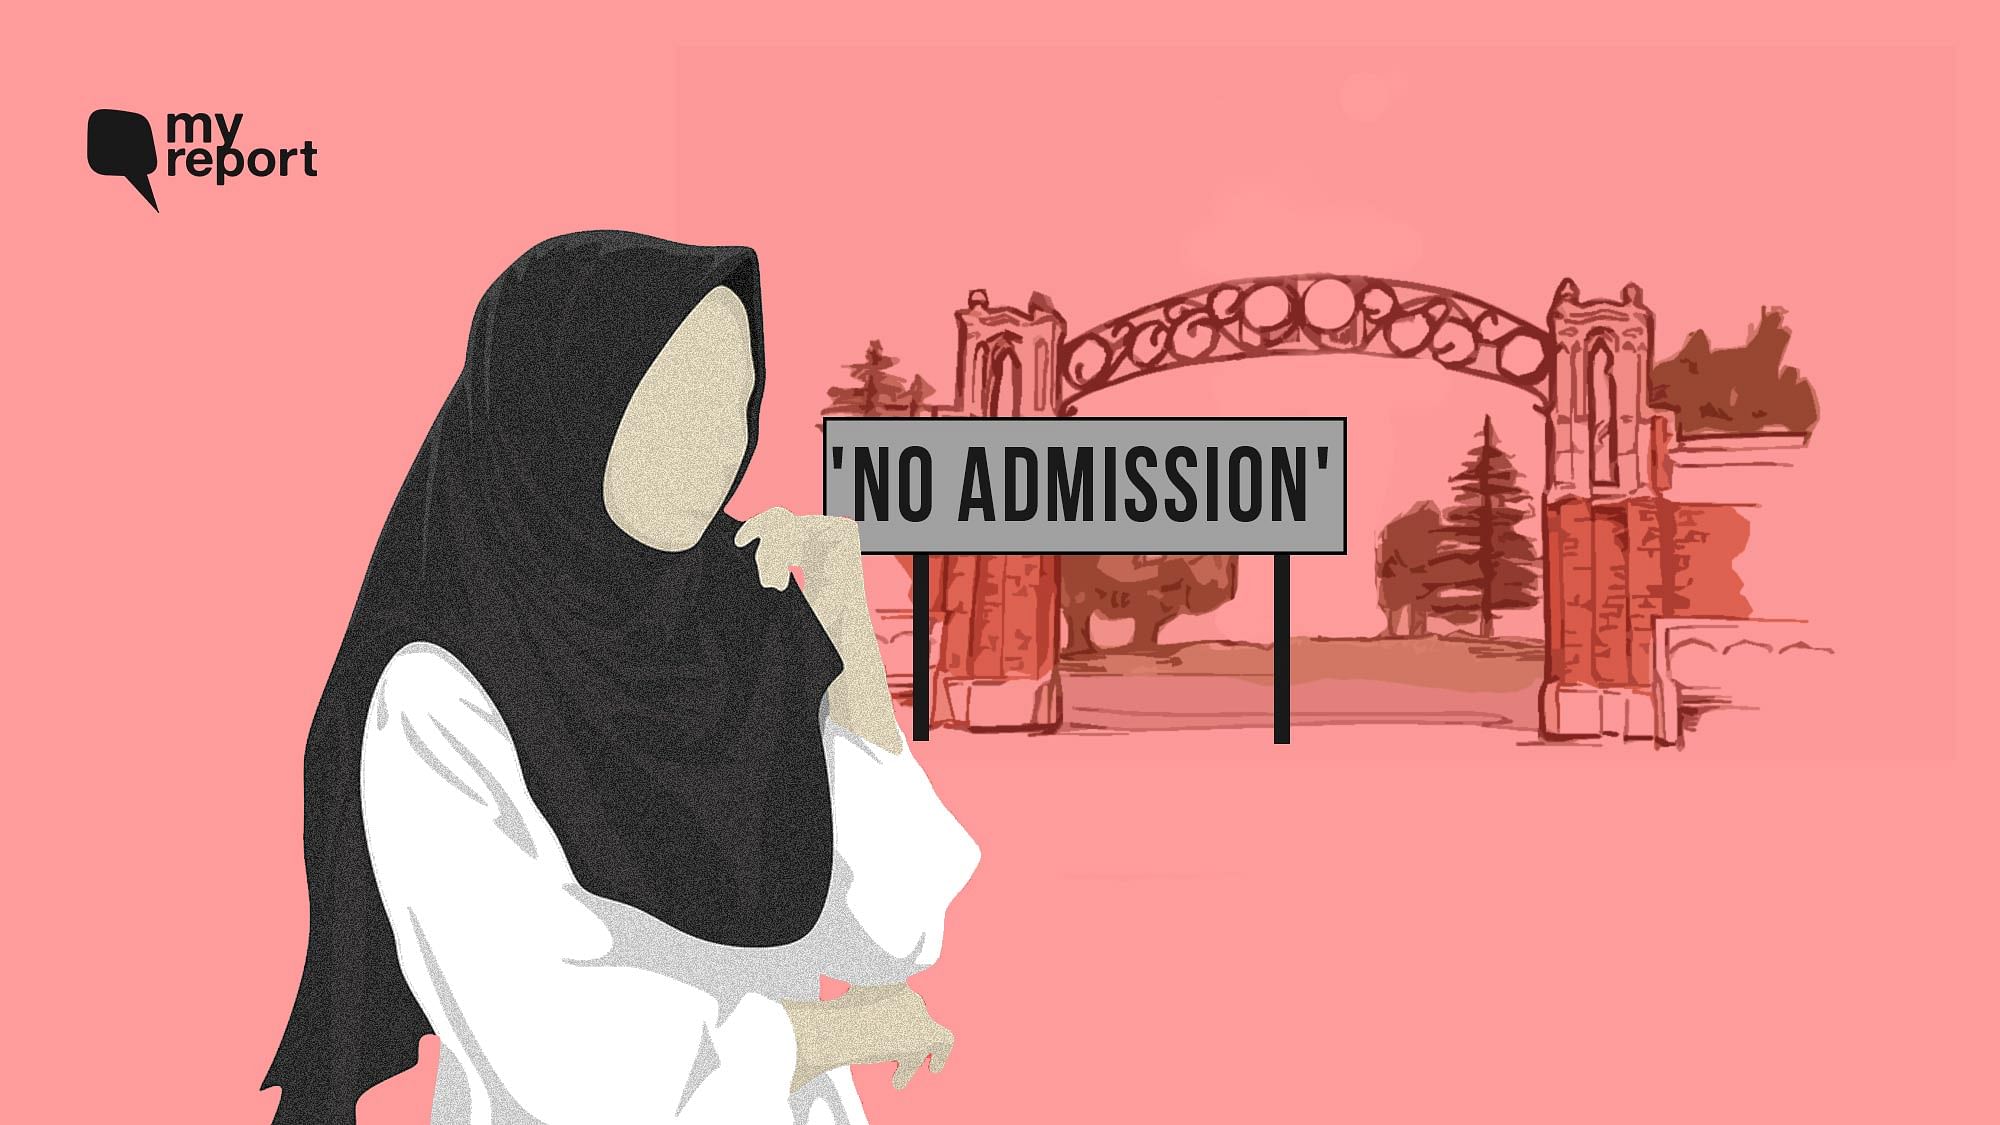 Fathima Fazeela, 16, is not being allowed re-admission into her college in Mangaluru for wearing a hijab to her classes.